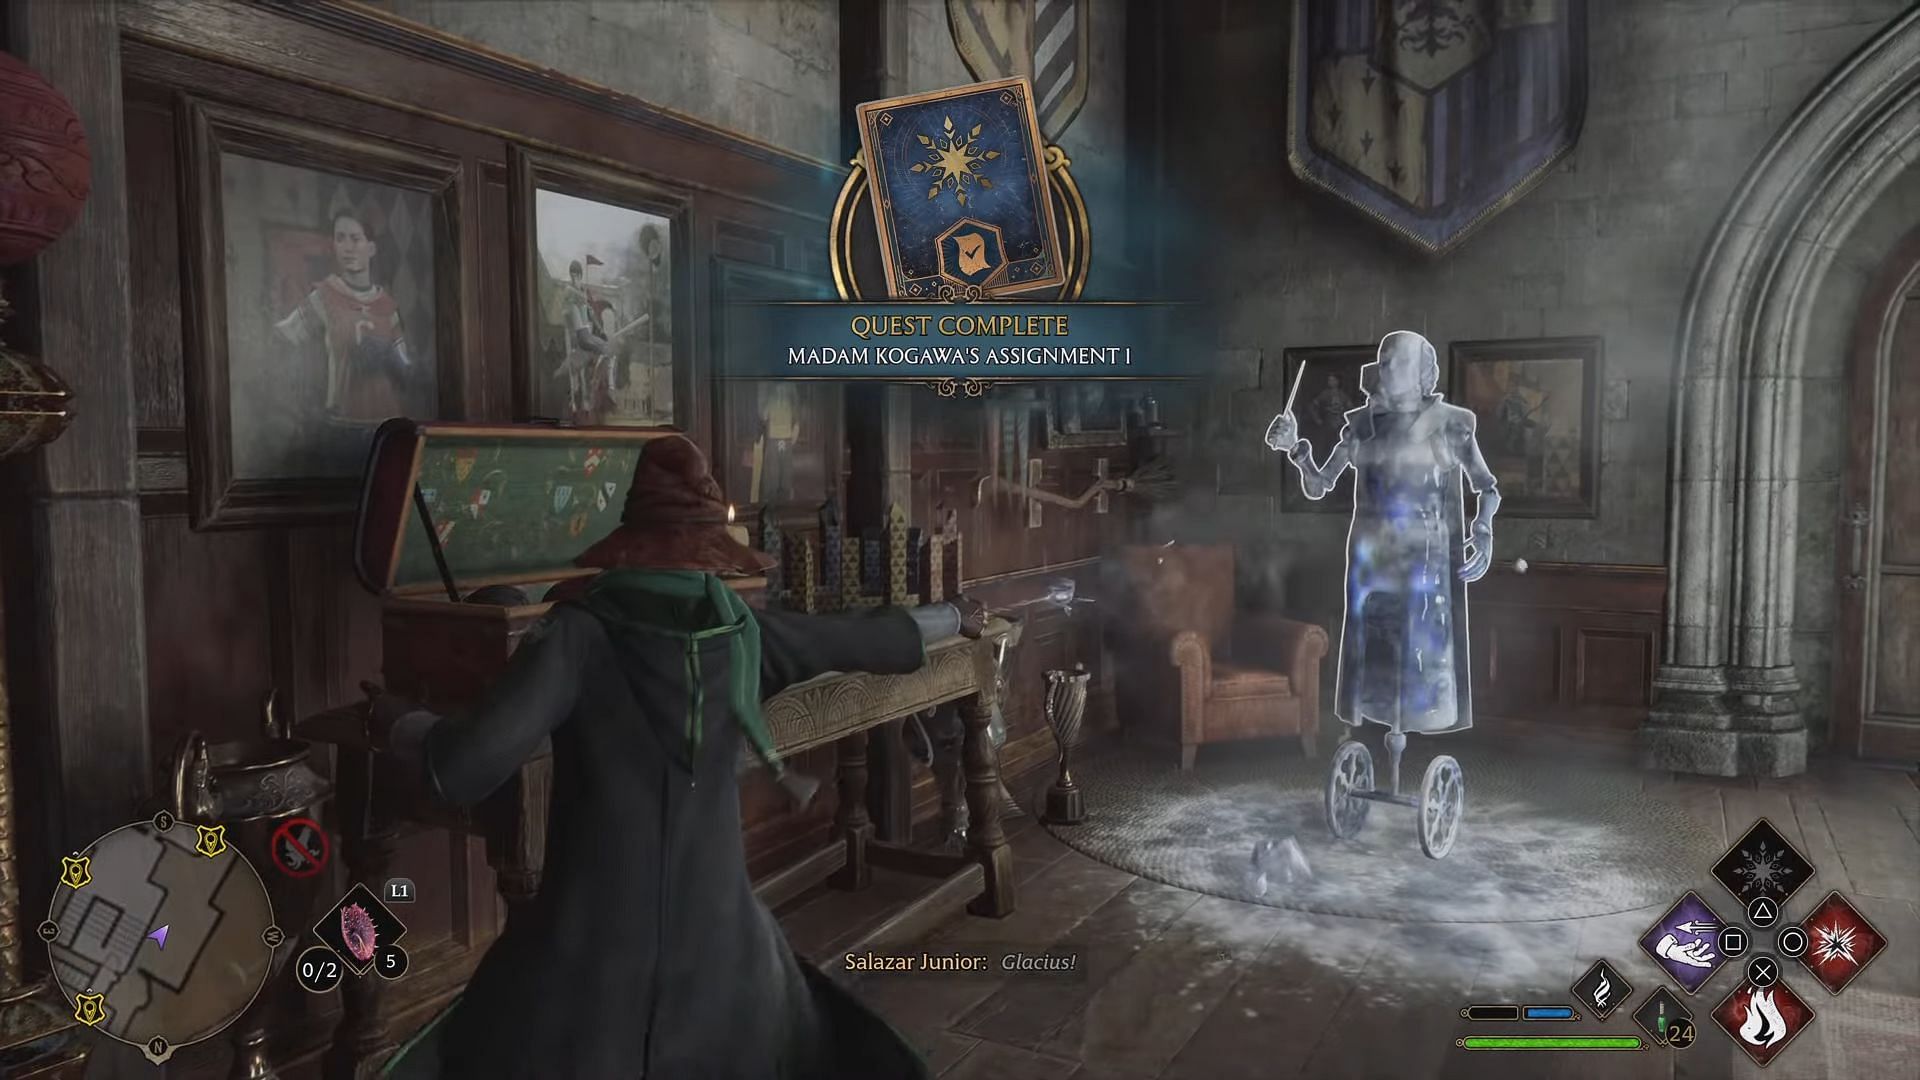 Glacius is an incredibly useful freezing spell players can unlock in Hogwarts Legacy (Image via YouTube/Manugames92)